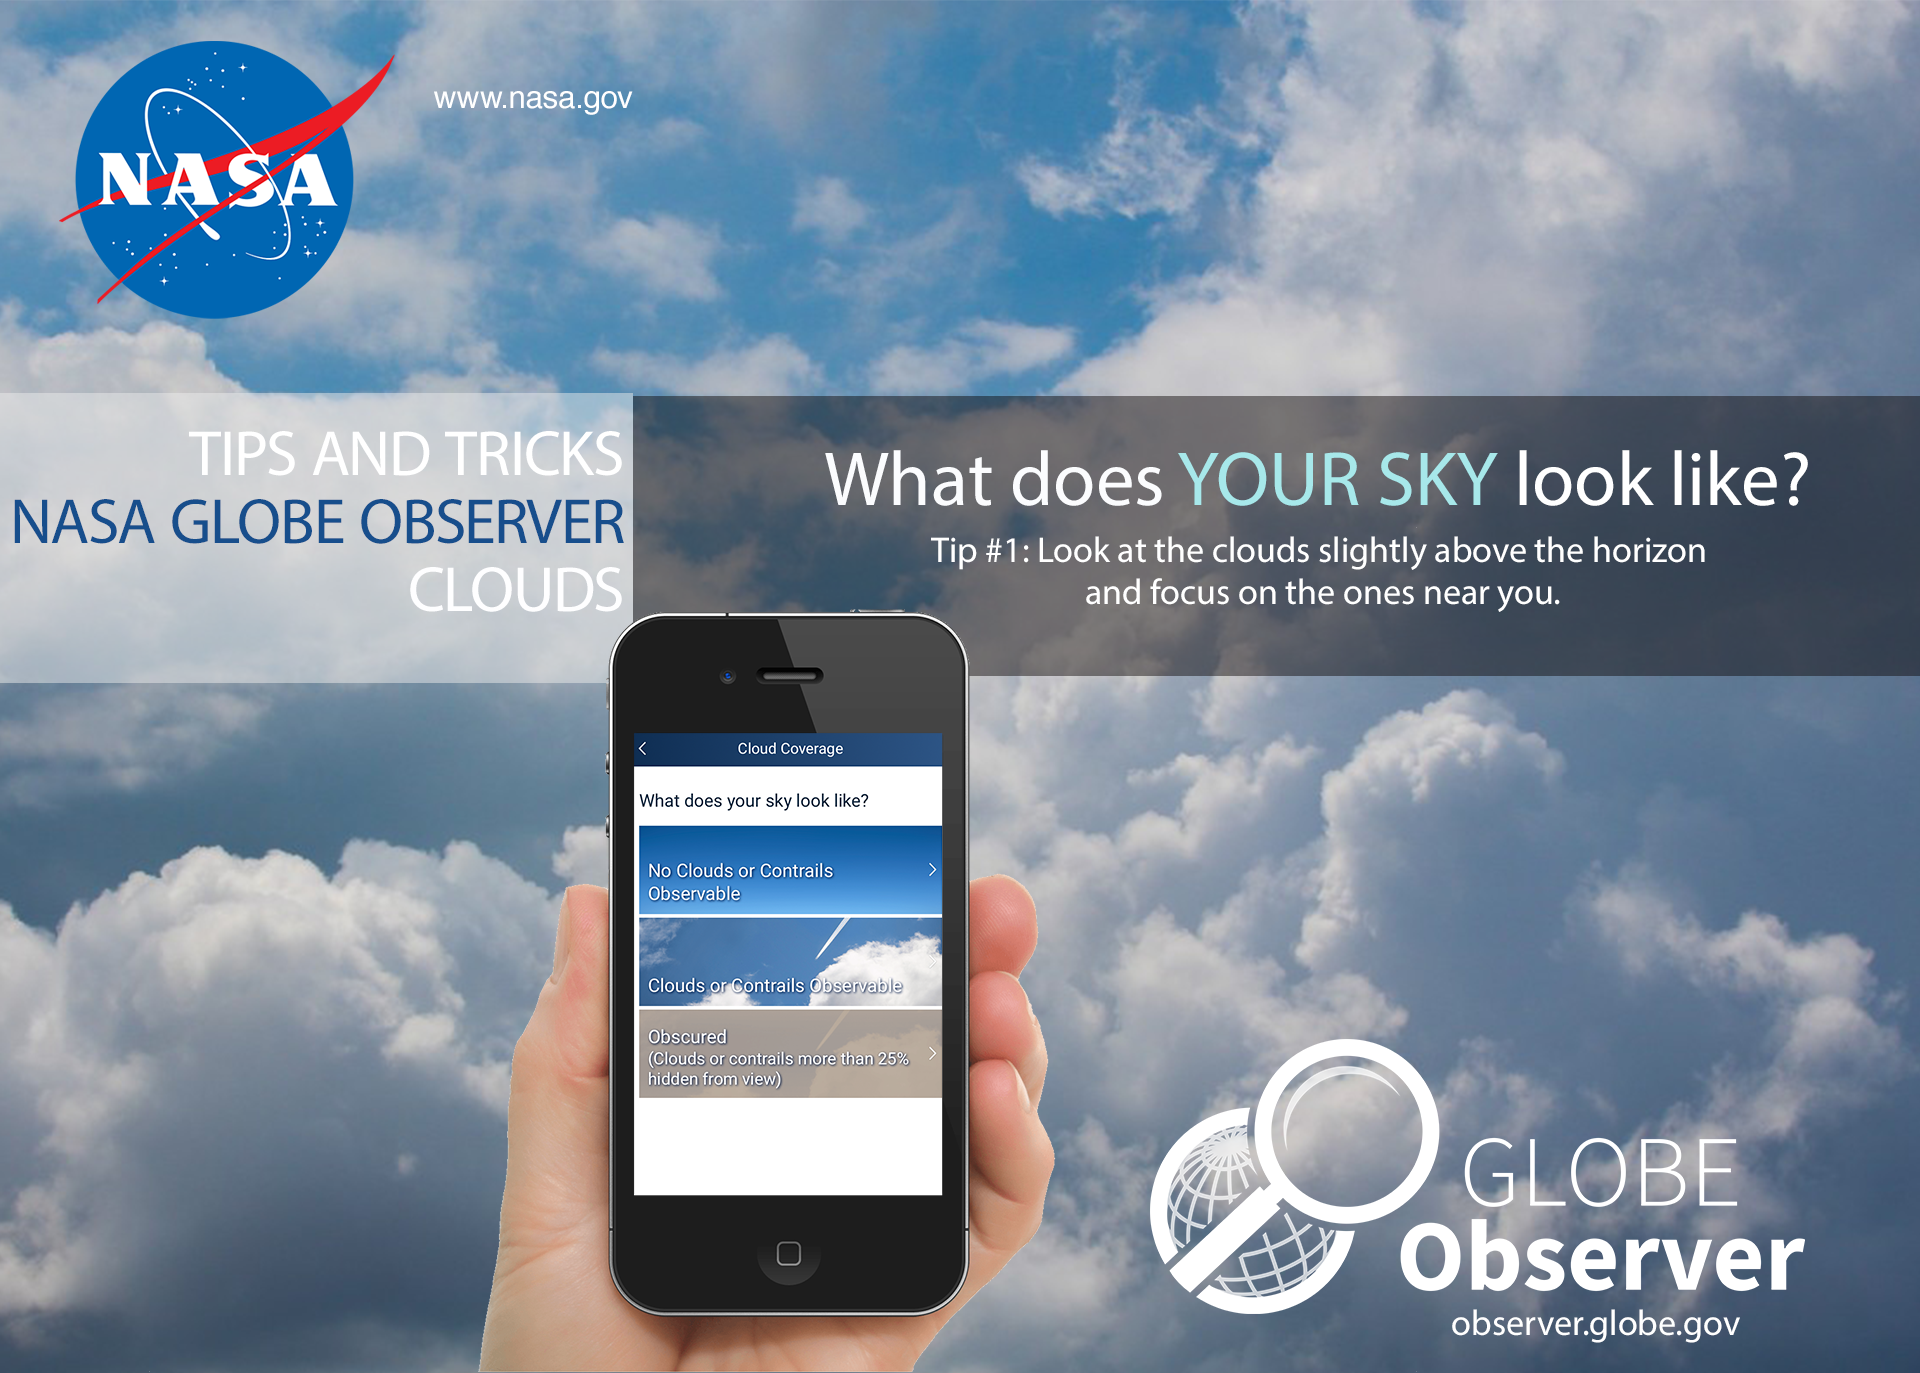 GLOBE Observer What does YOUR SKY look like?